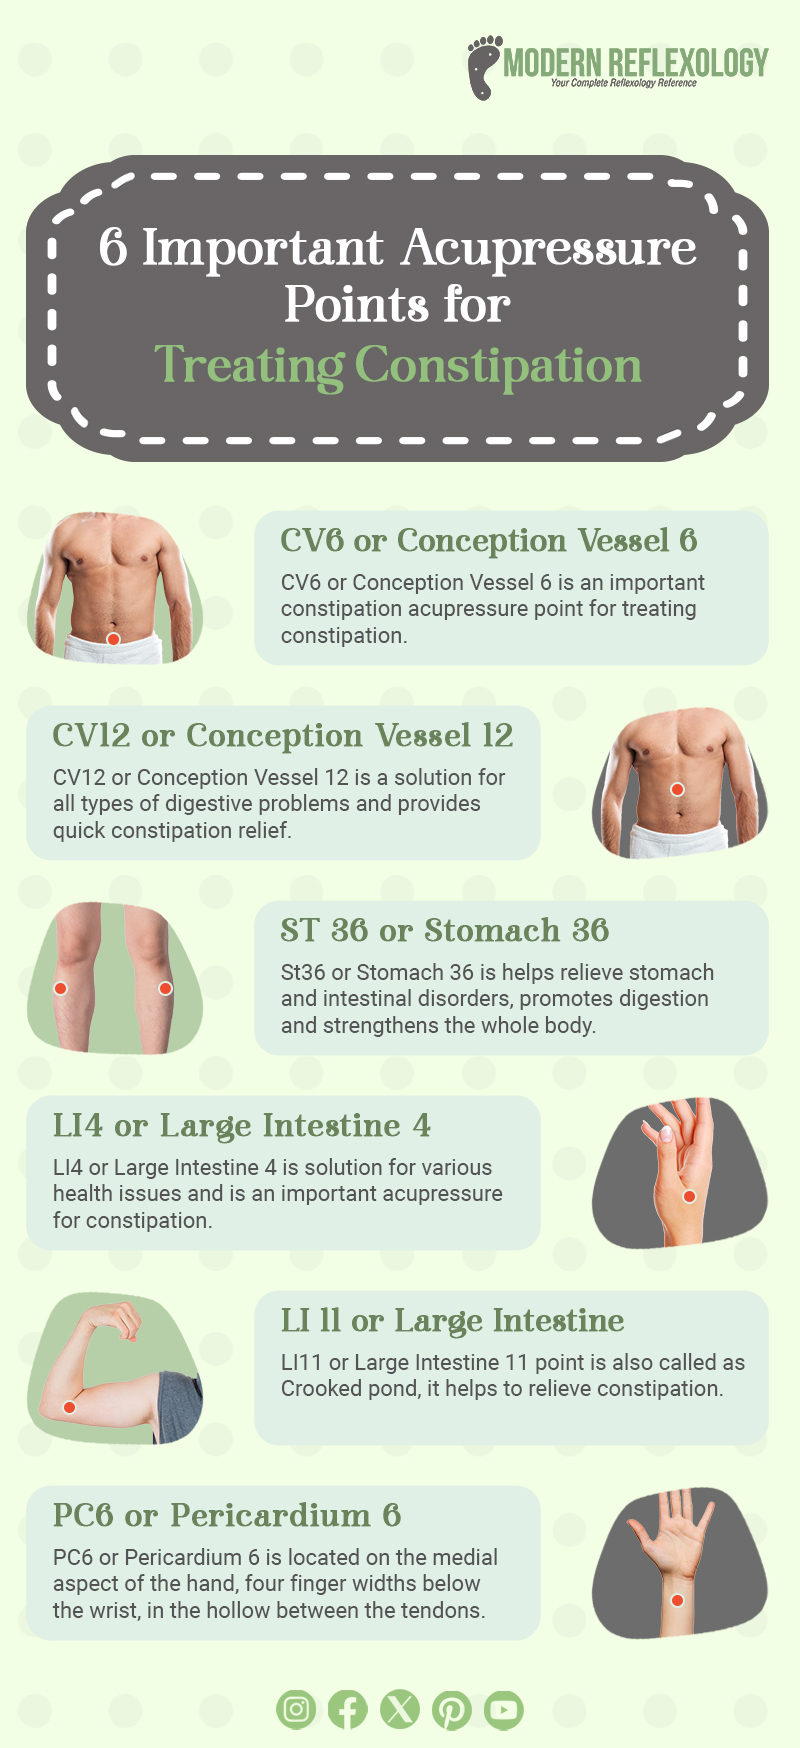 Infographic Acupressure Points for Treating Constipation